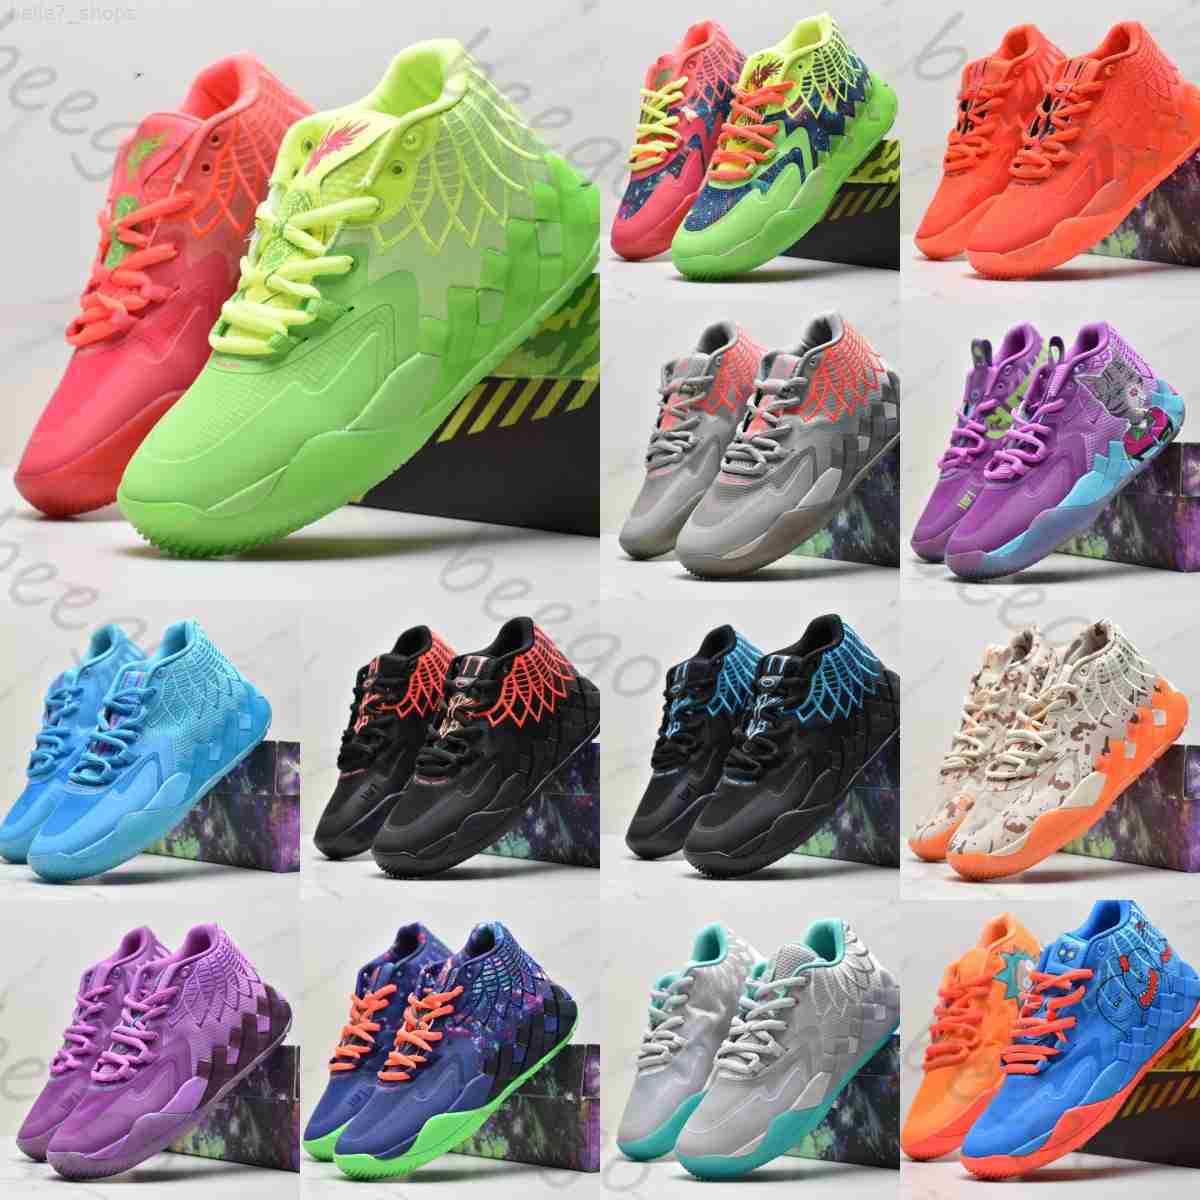 

Basketball Shoes MB 1 Rick And Morty for sale LaMelos Ball Men Women Iridescent Dreams Buzz City Rock Ridge Red Galaxy Not Lamelo, #7